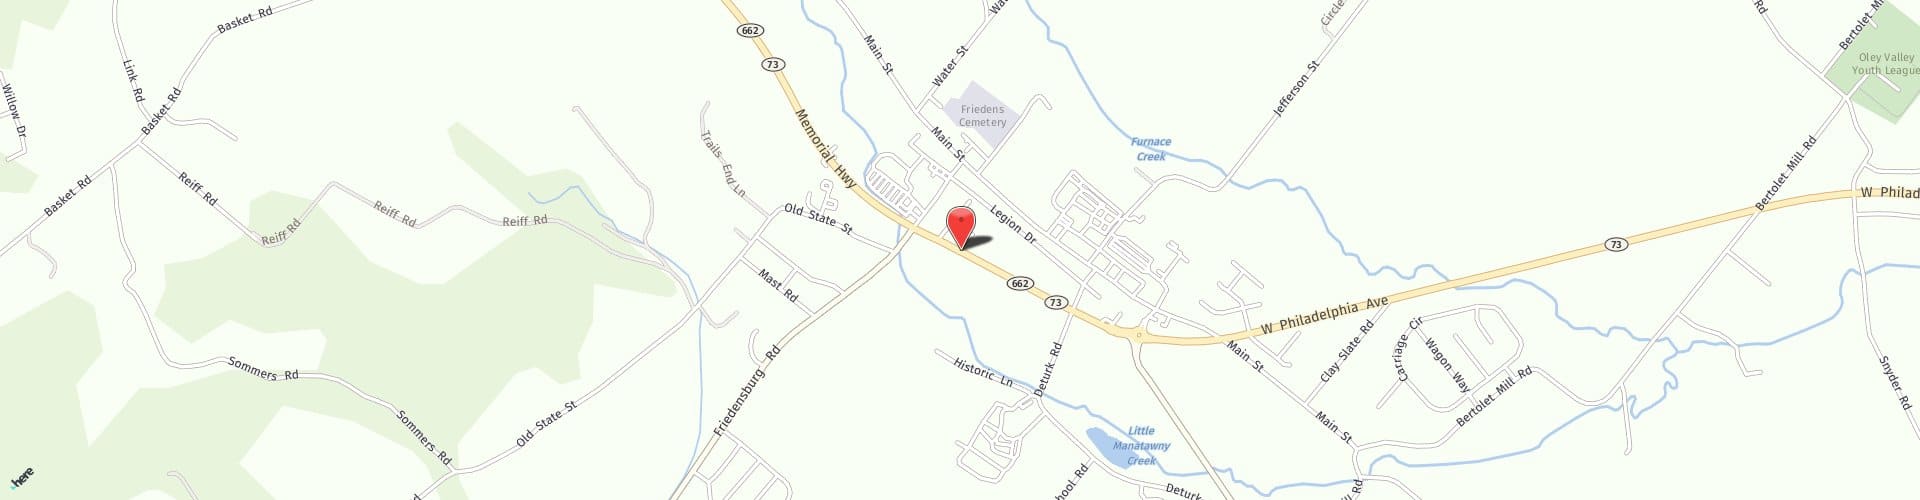 Location Map: 2 Town Center Drive Oley, PA 19547